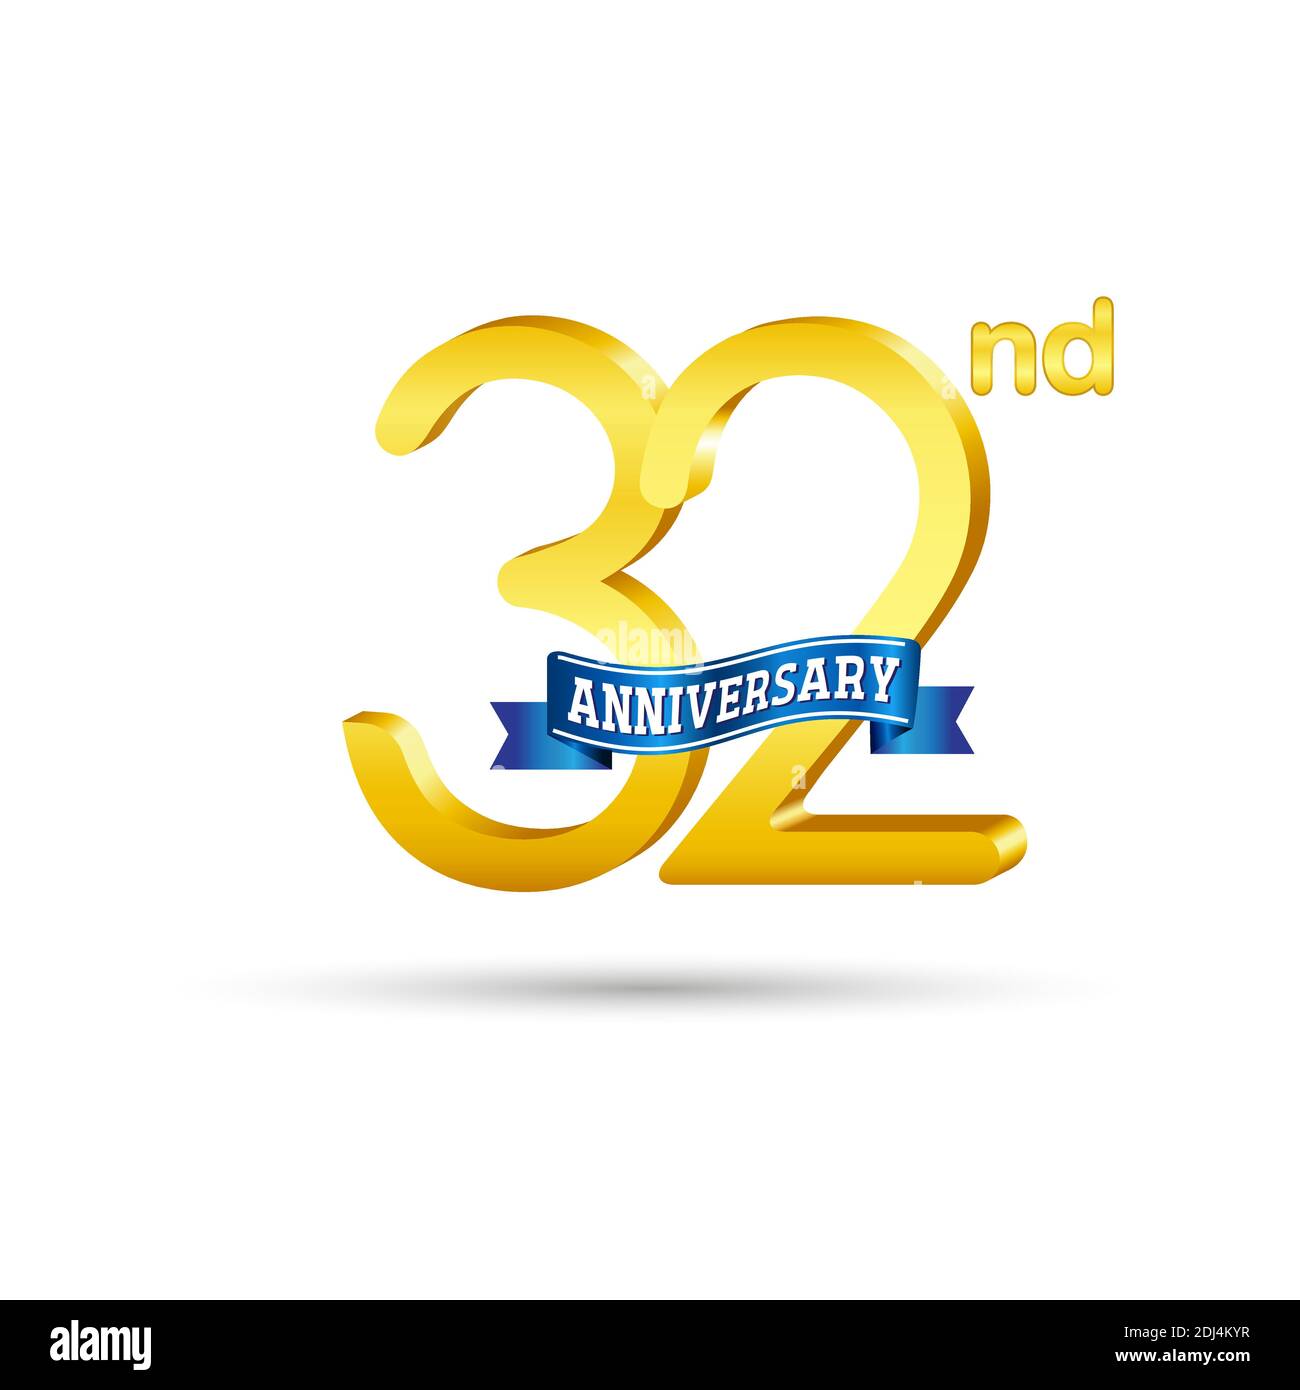 32nd golden Anniversary logo with blue ribbon isolated on white background. 3d gold Anniversary logo Stock Vector